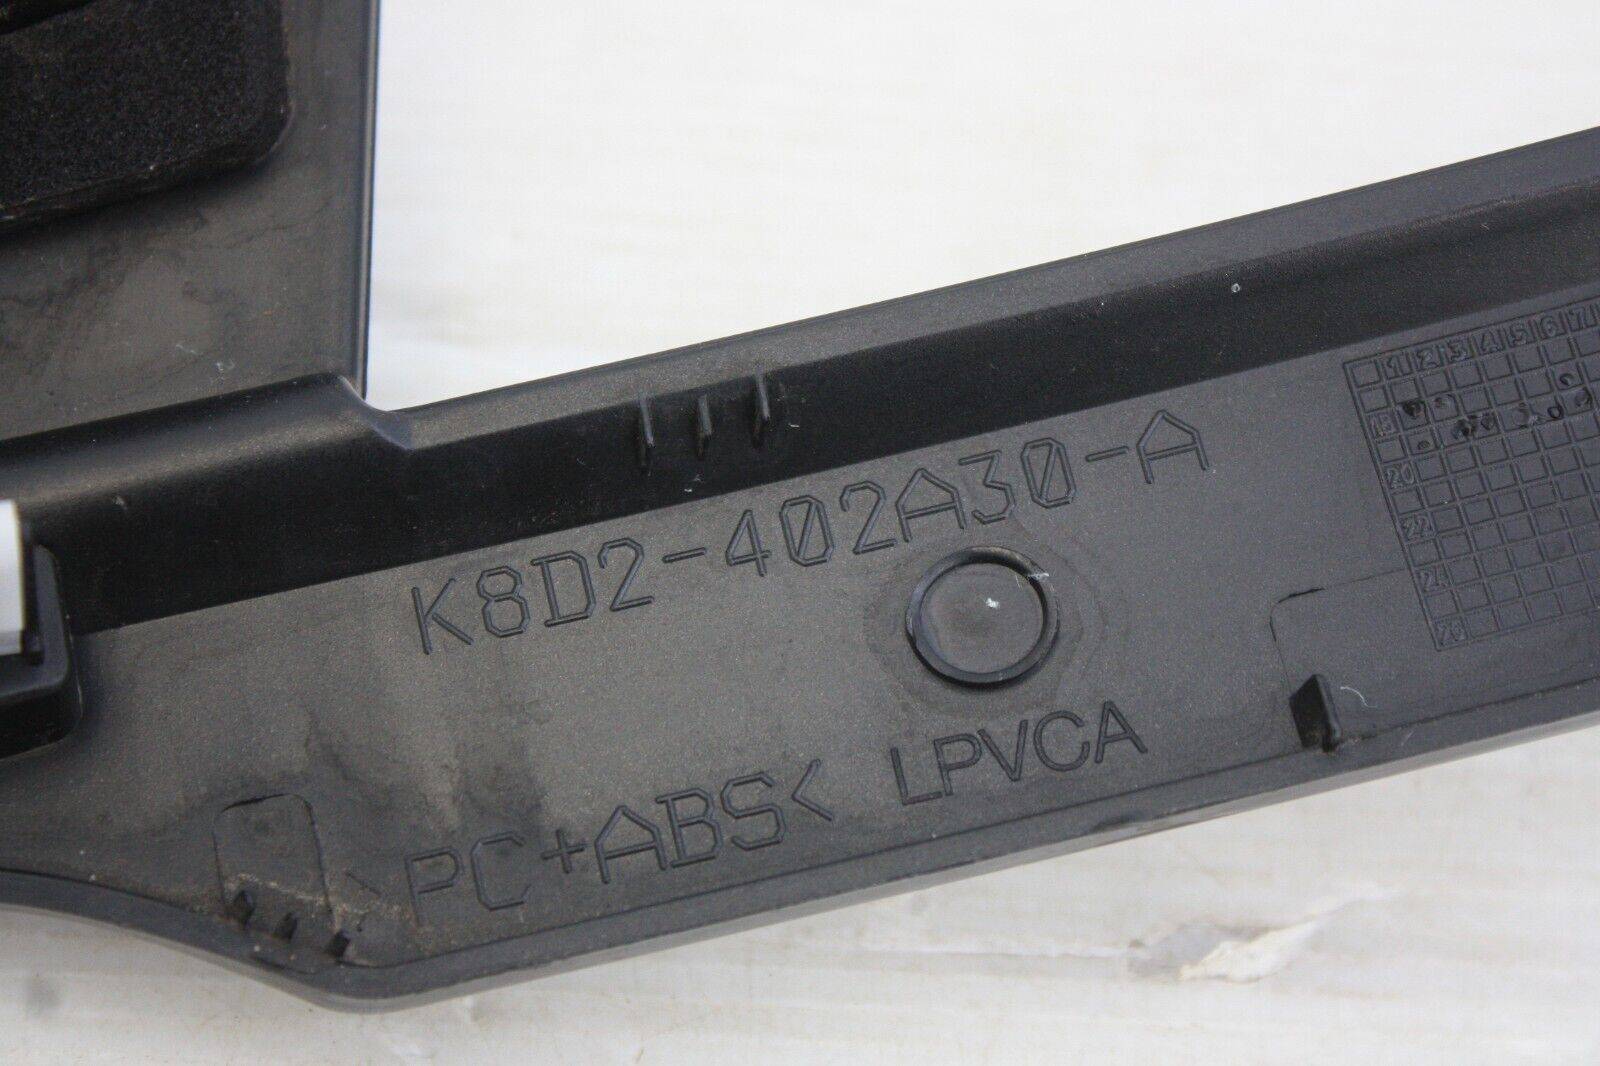 Range-Rover-Evoque-Rear-Tailgate-Trunk-Moulding-2019-ON-K8D2-402A30-A-Genuine-175681072660-11